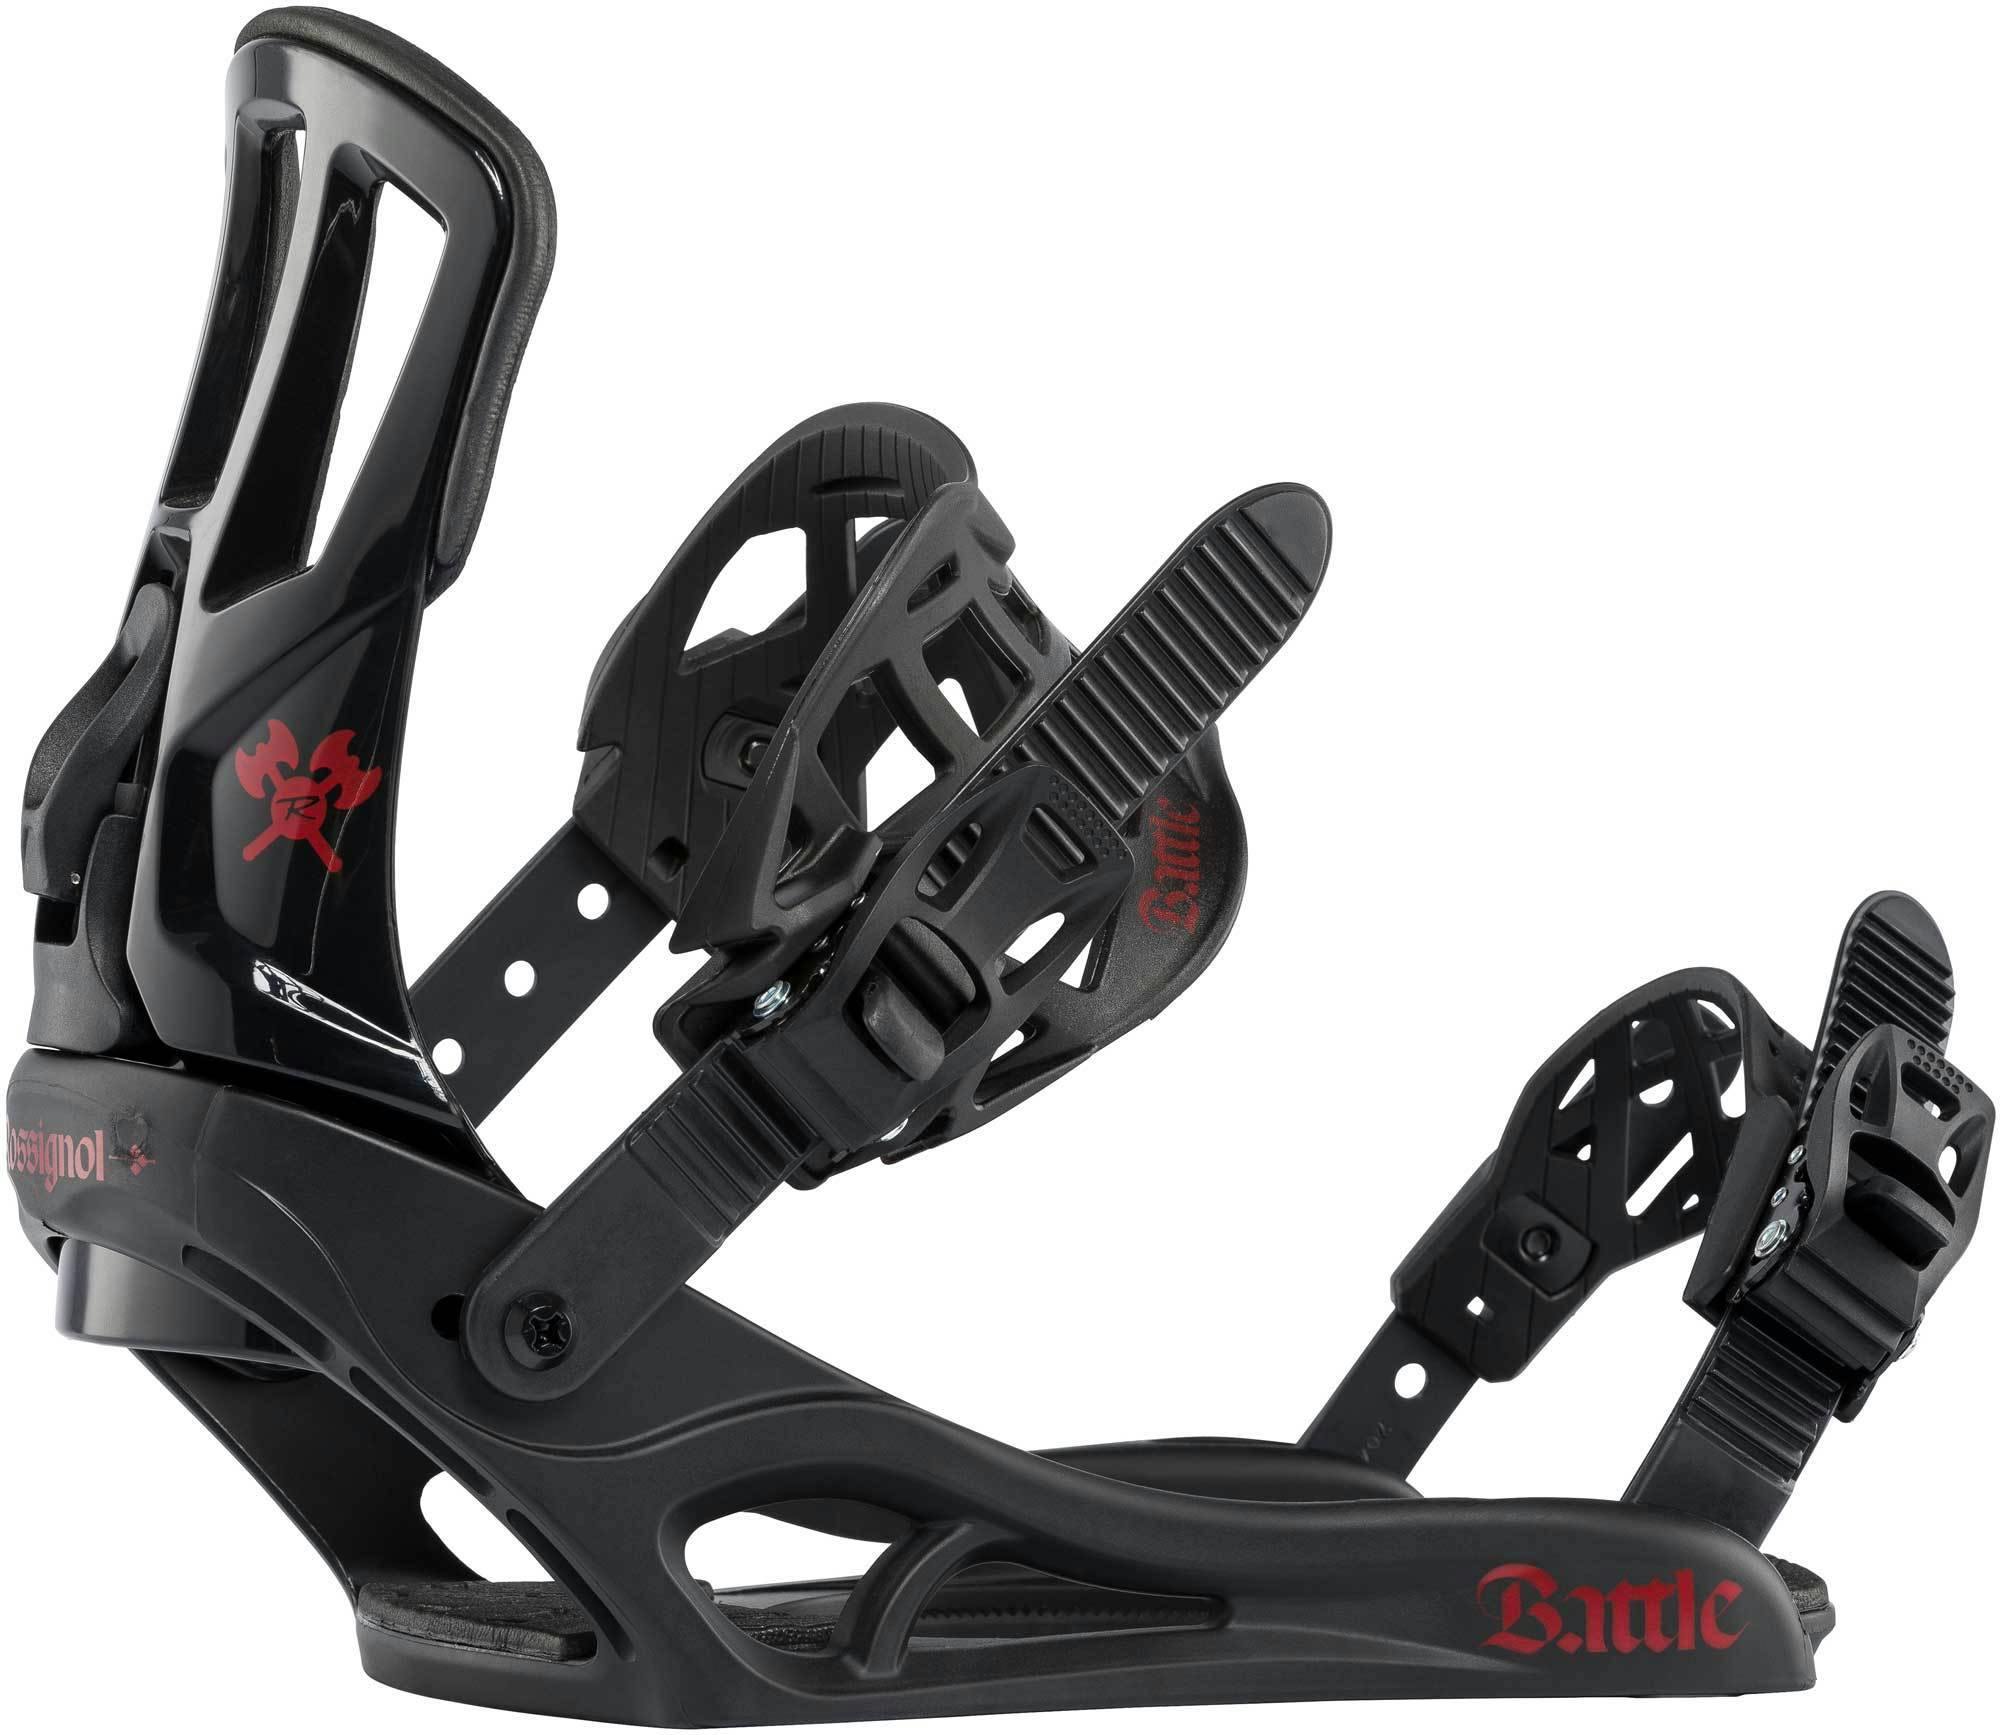 humor Pole trade Top 10 Snowboard Bindings under $200 | Curated.com